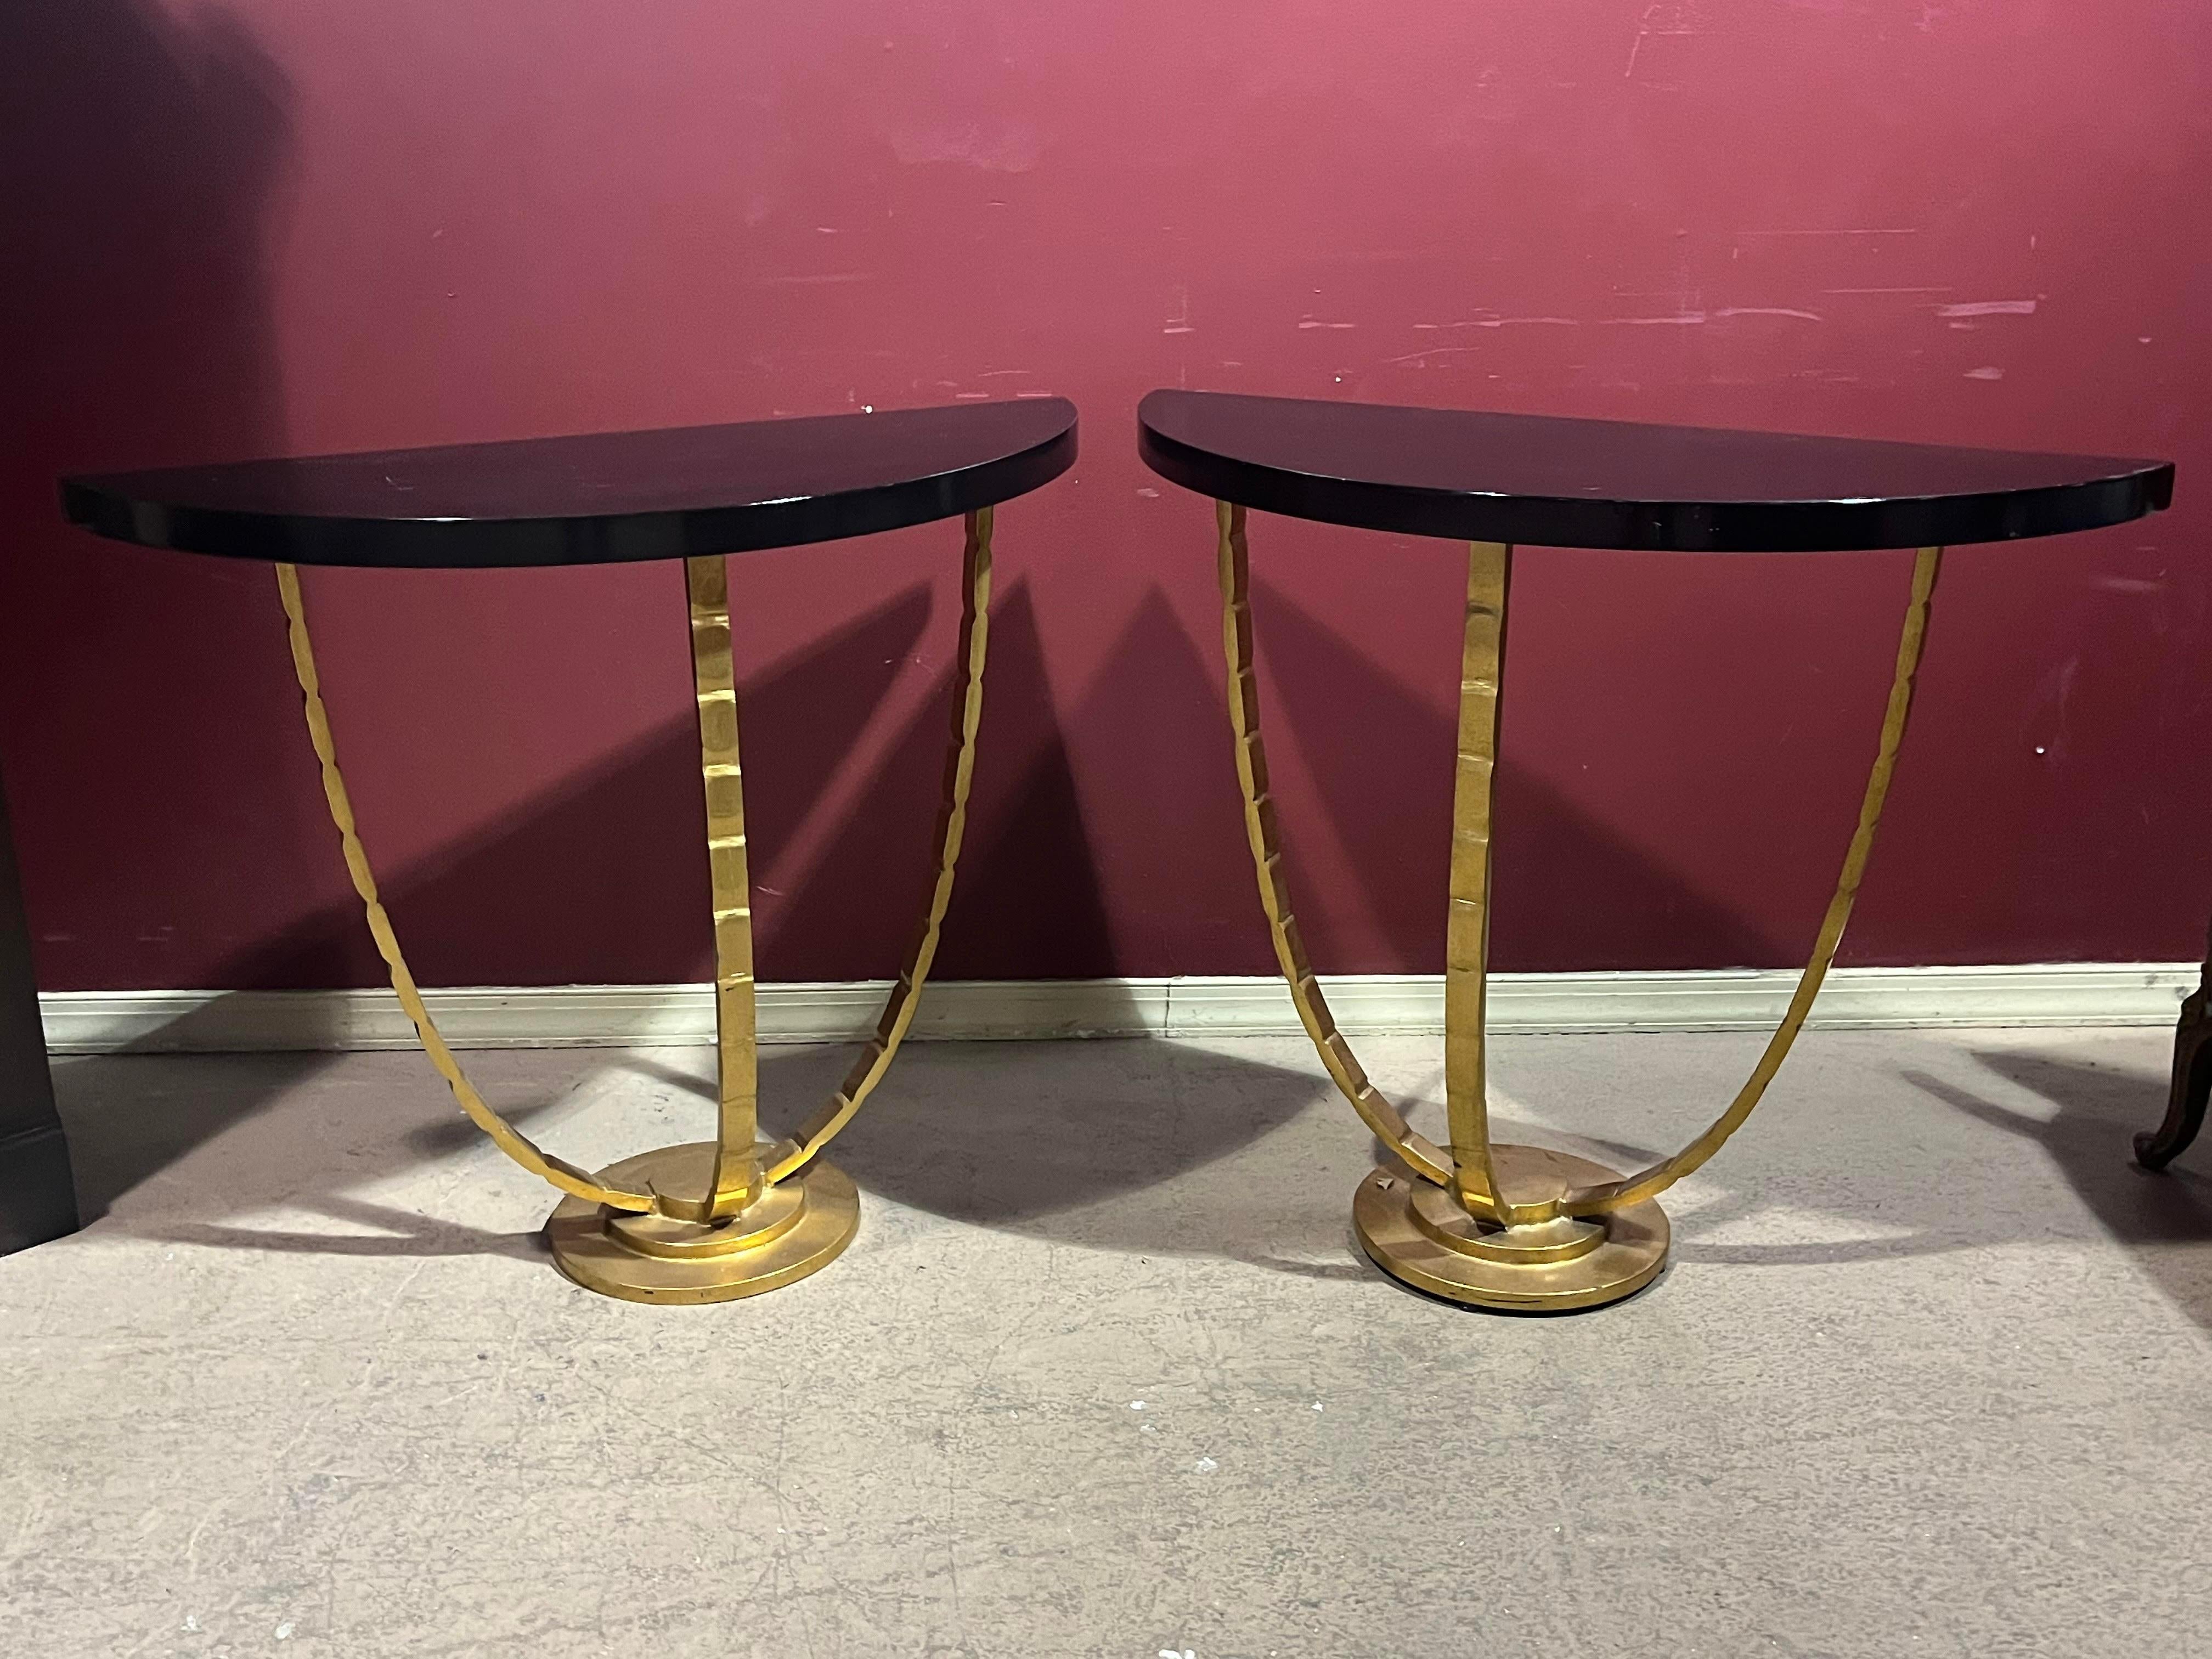 This is a beautiful pair of French art deco style gilded steel and wood console tables. The tables are finished in gold leaf and incredibly elegant and sophisticated. The table tops could be fitted with marble or faux painted in any finish. They